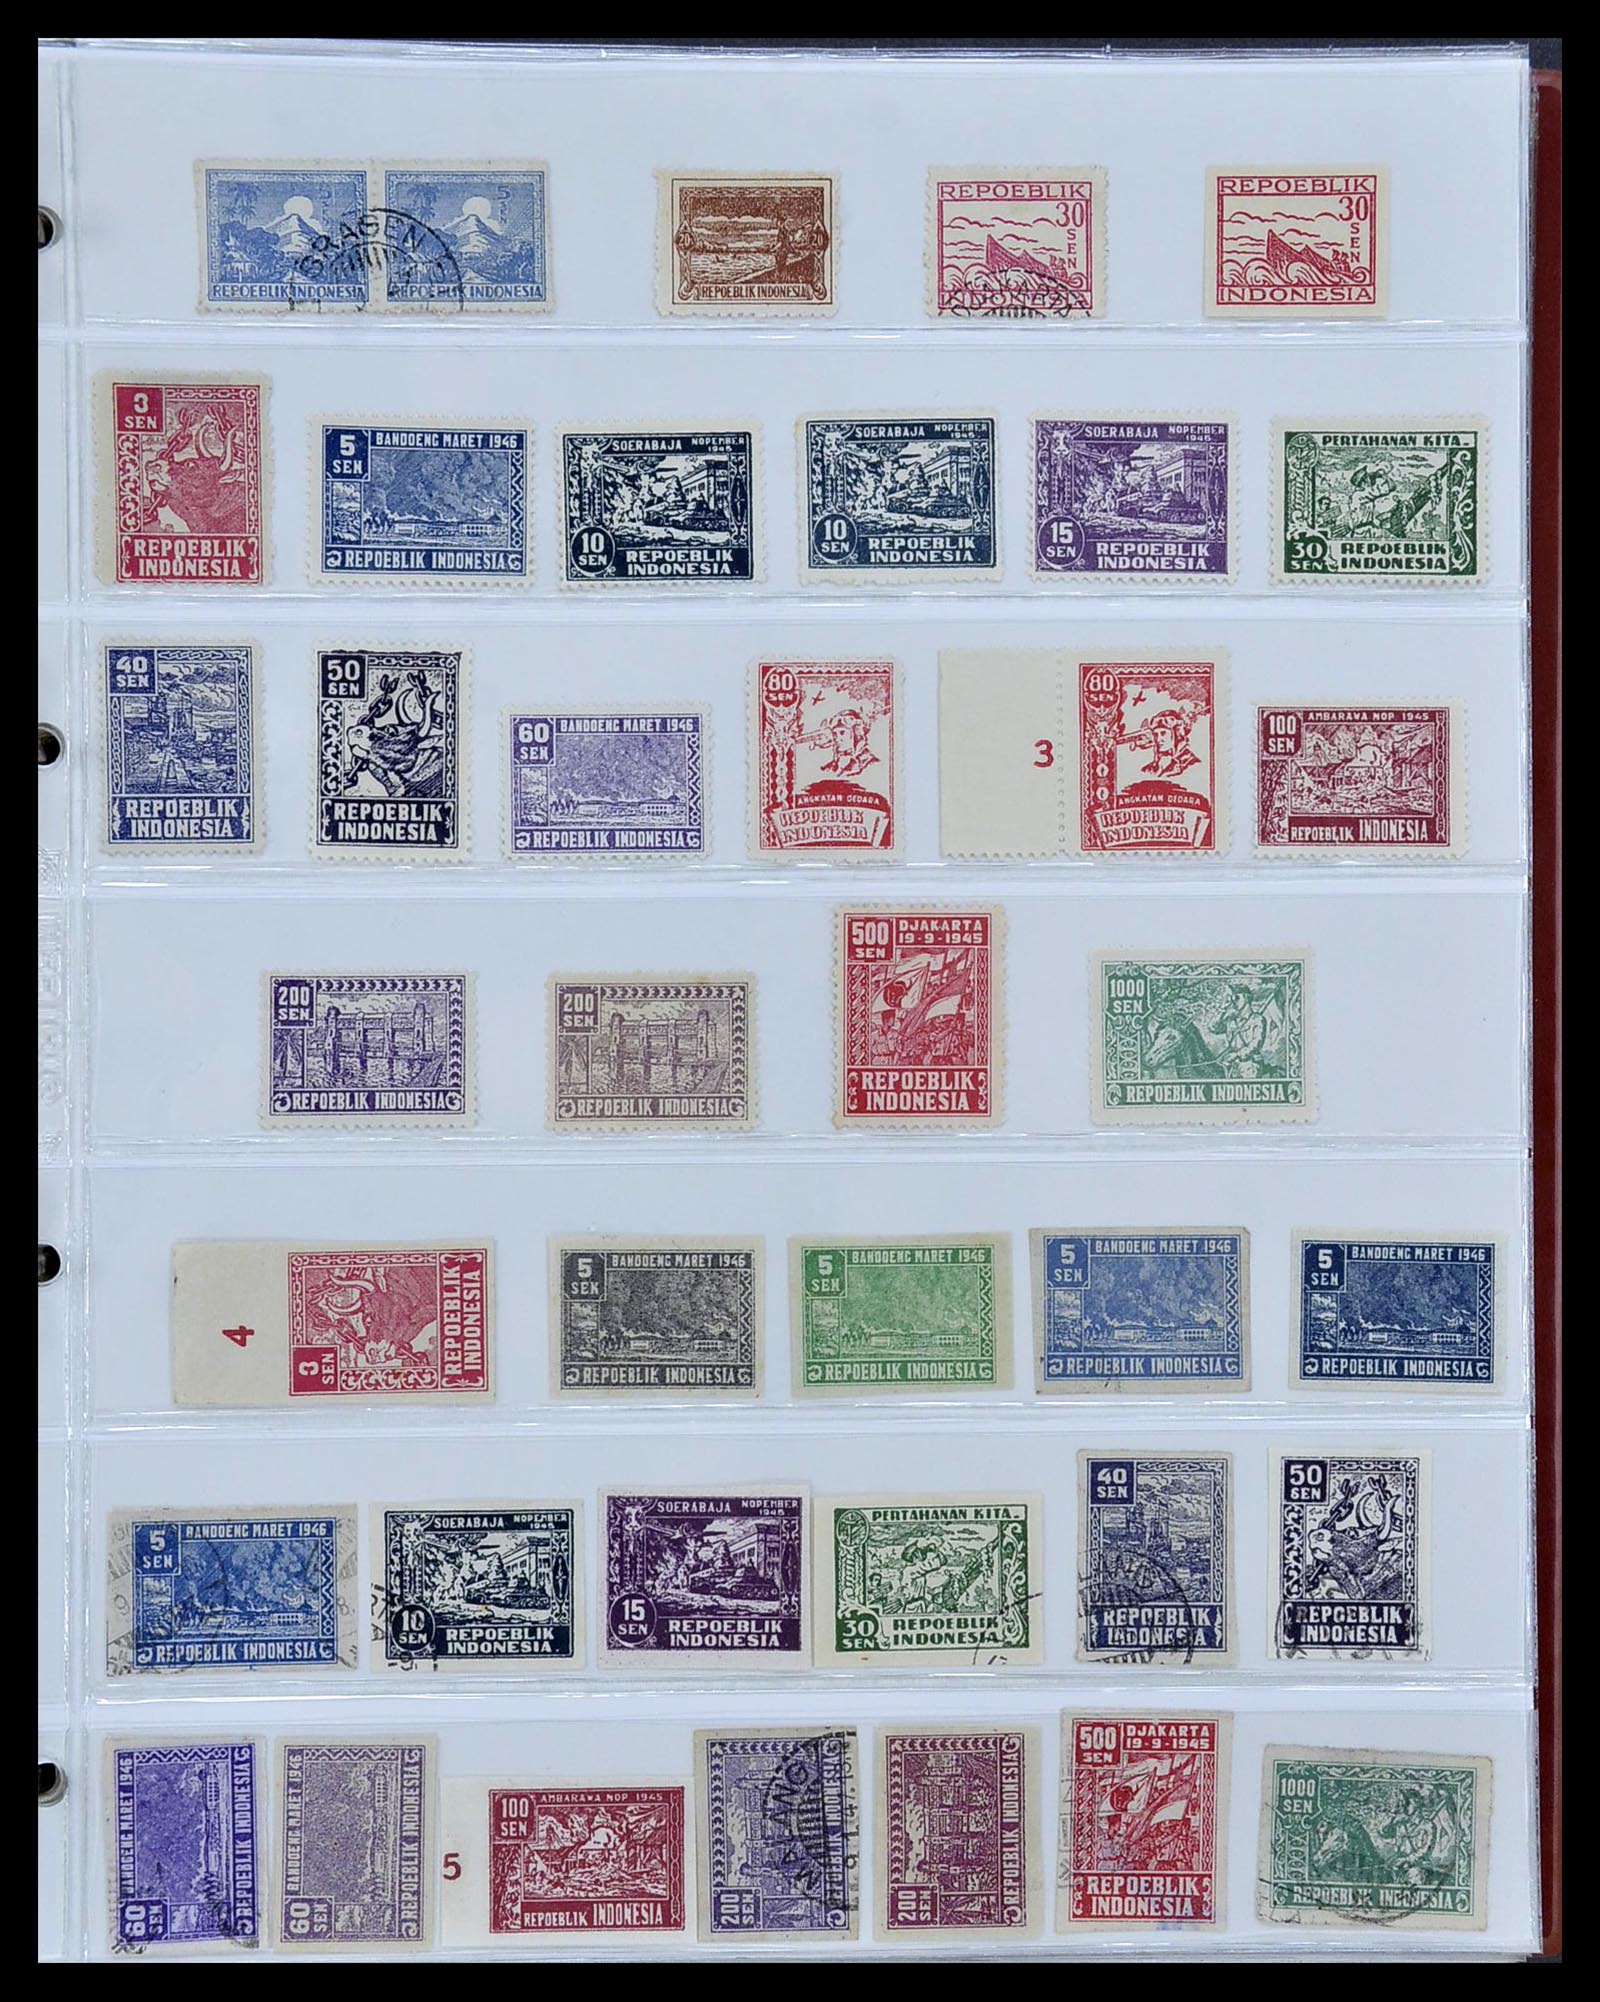 34545 070 - Stamp Collection 34545 Japanese Occupation of the Dutch East Indies and 